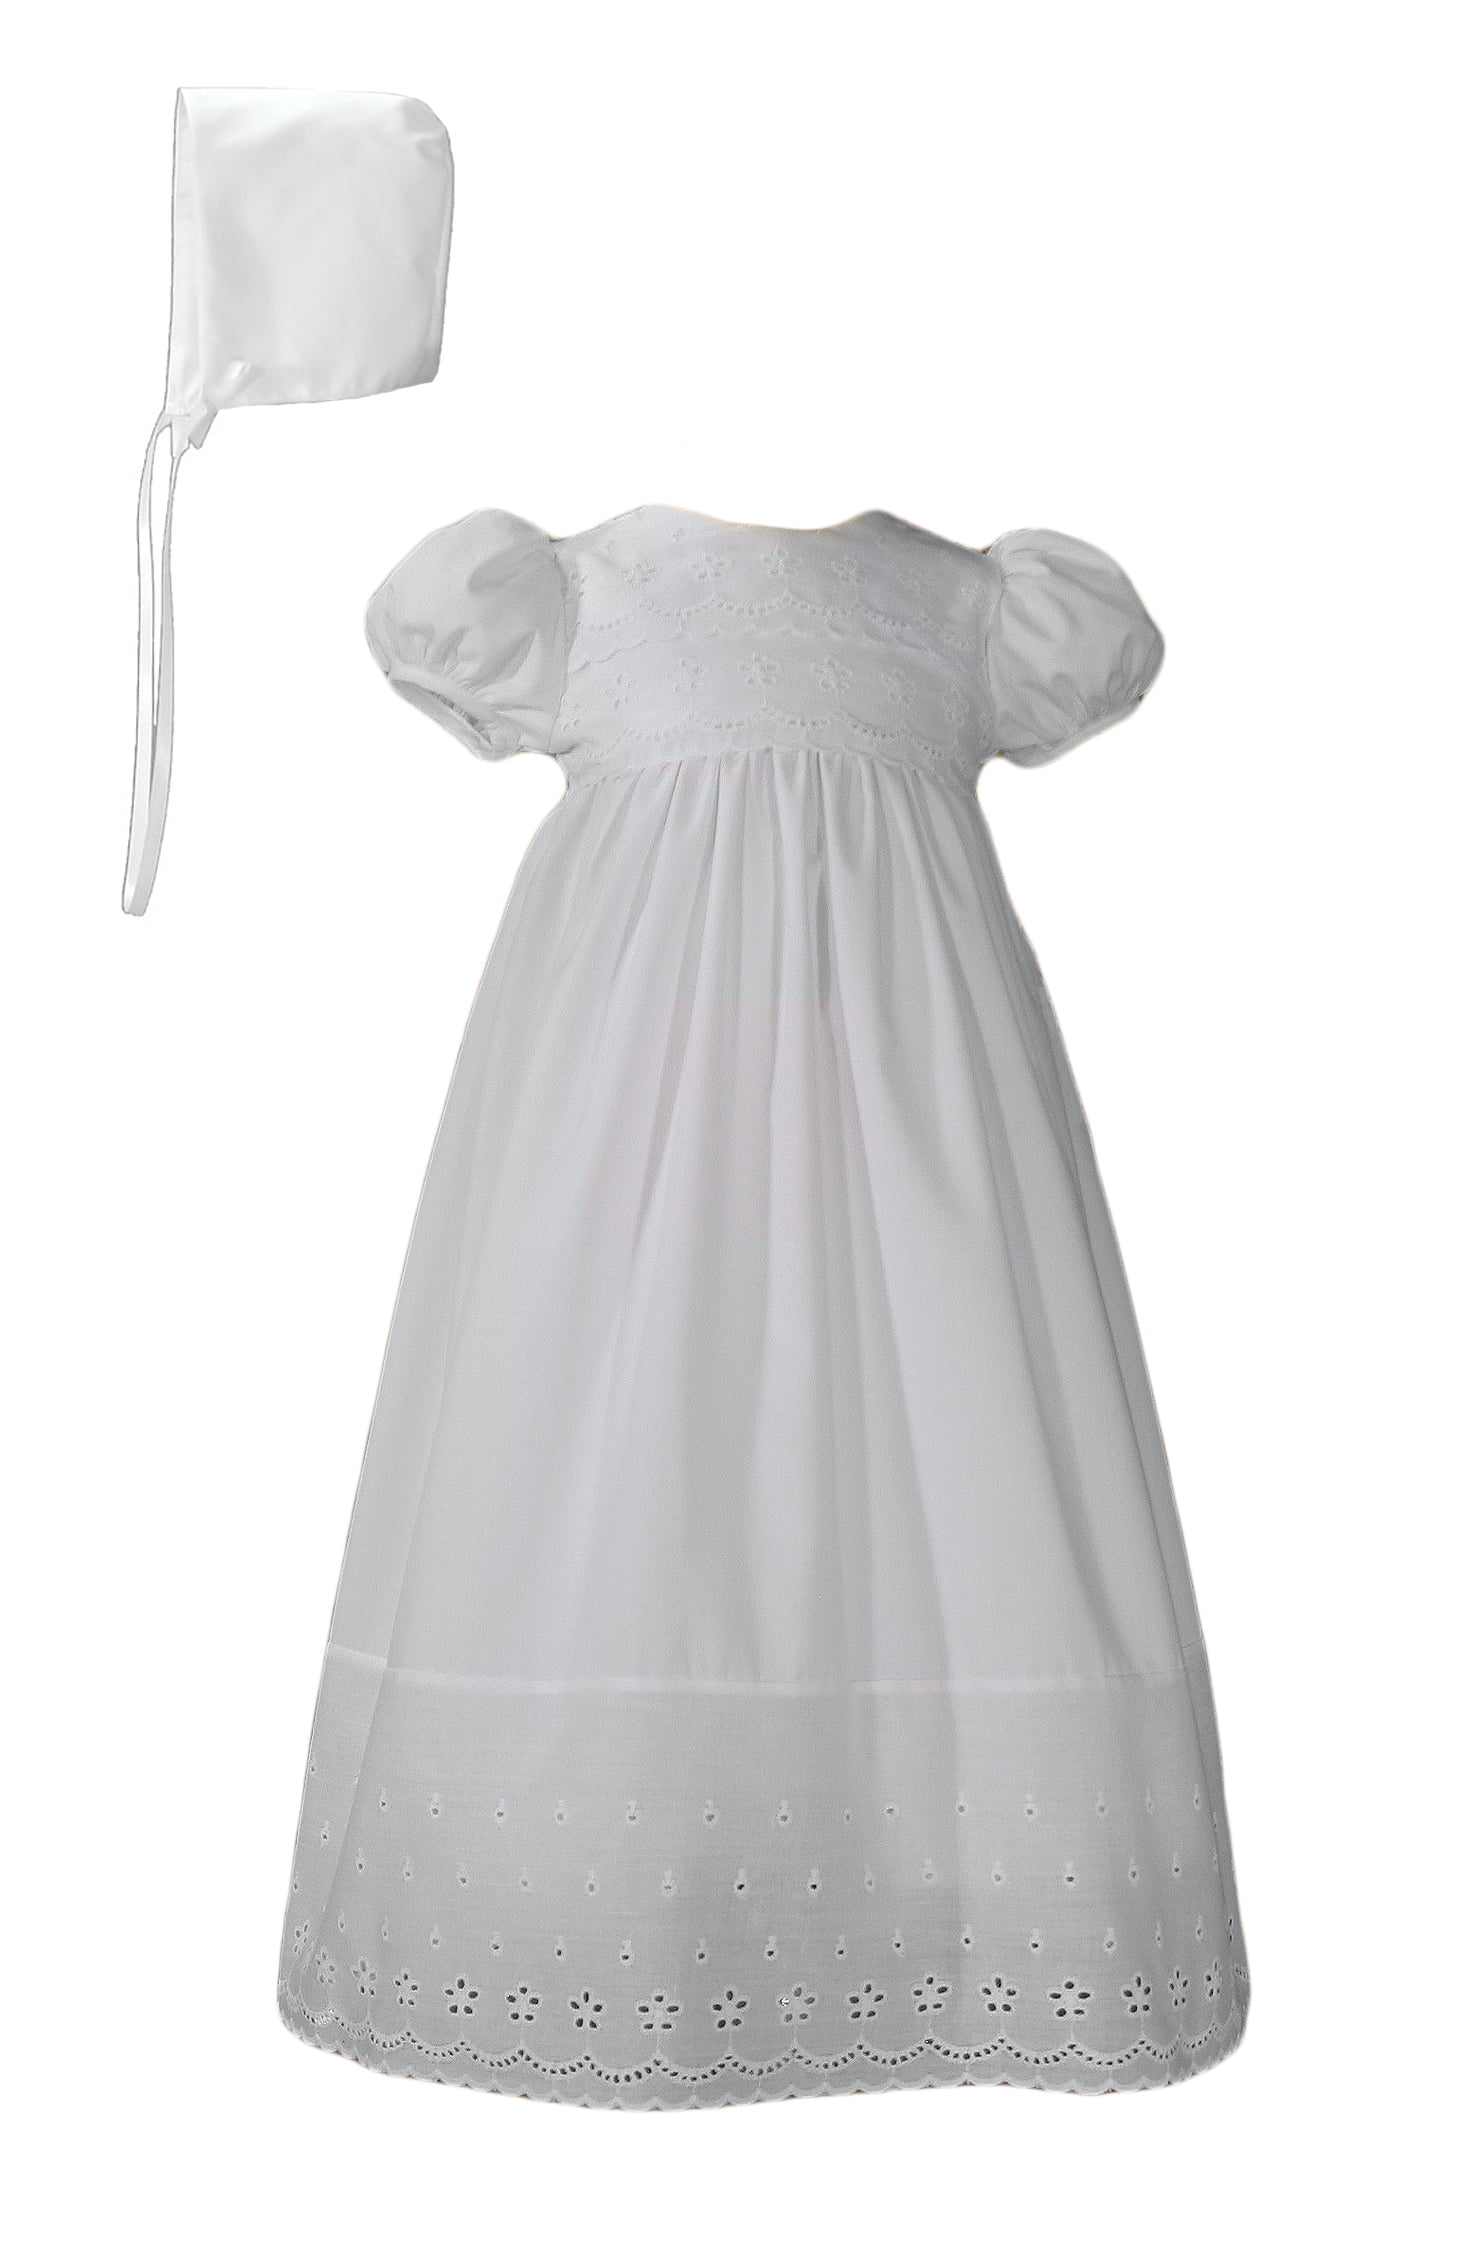 stores that sell baptism dresses